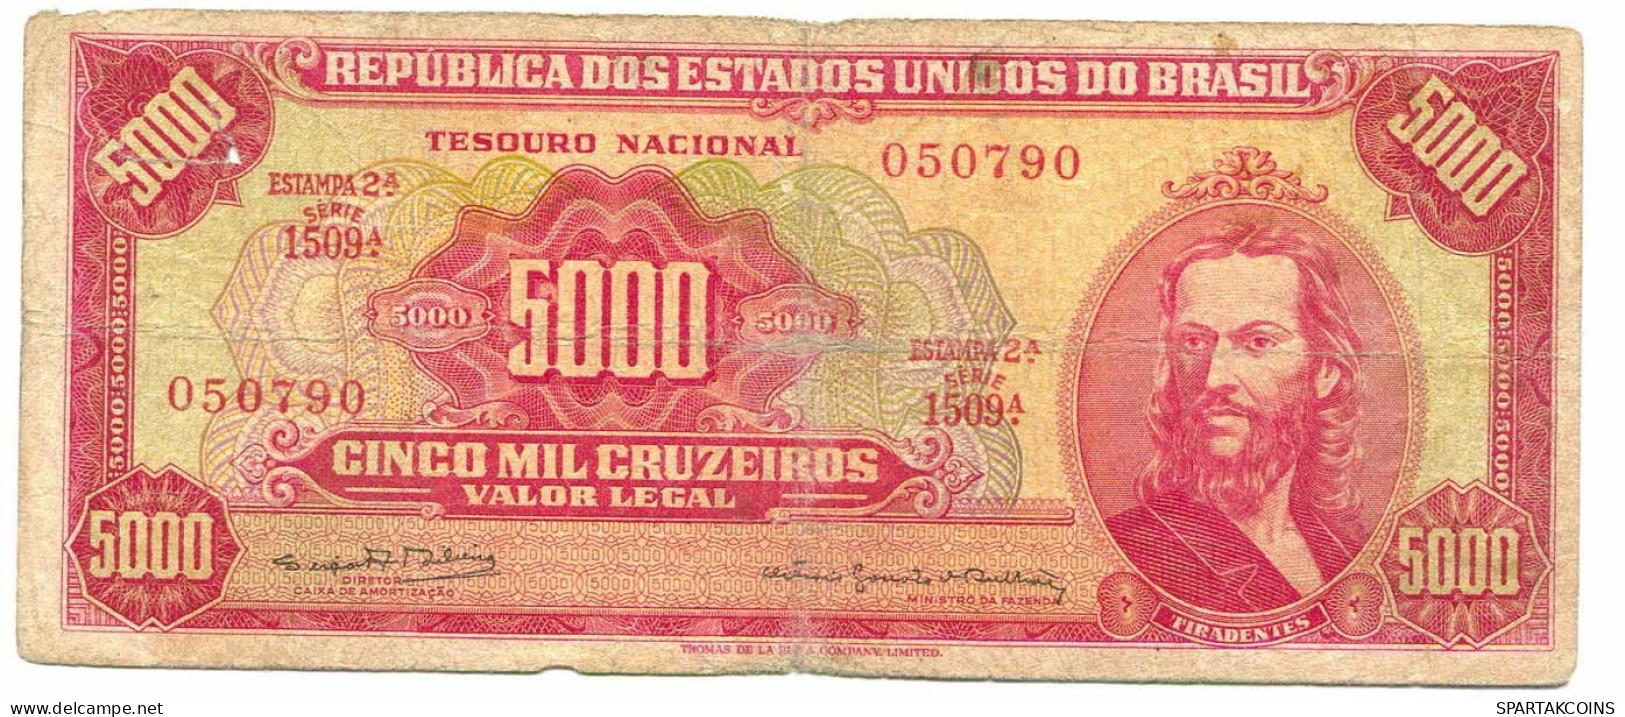 BRASIL 5000 CRUZEIROS 1964 SERIE 1509A Paper Money Banknote #P10876.4 - [11] Emissions Locales